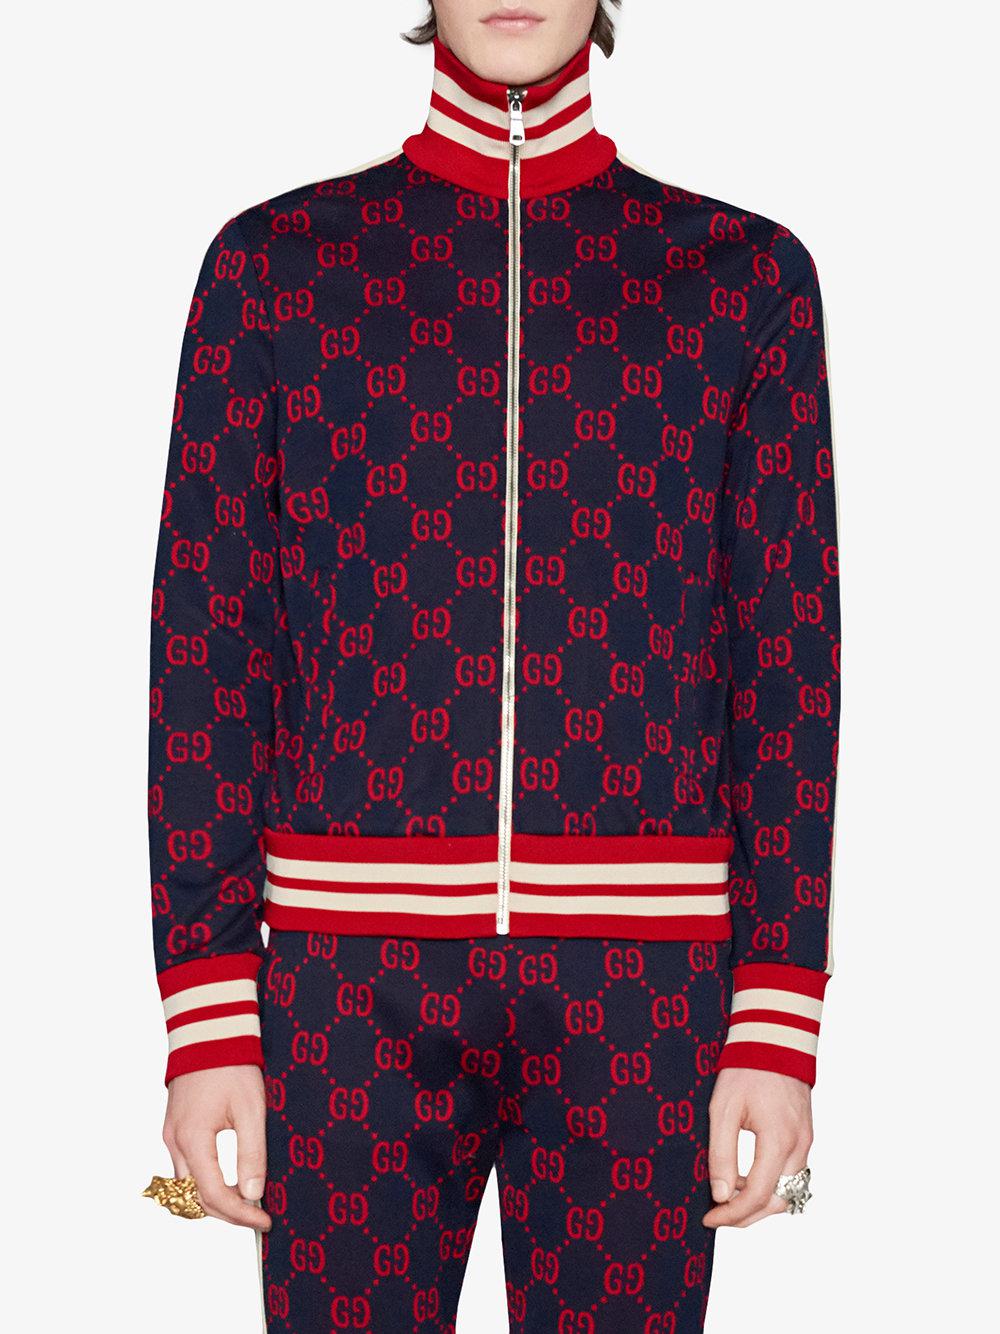 Gucci Cotton Sweat-jacket in Red for Men - Lyst